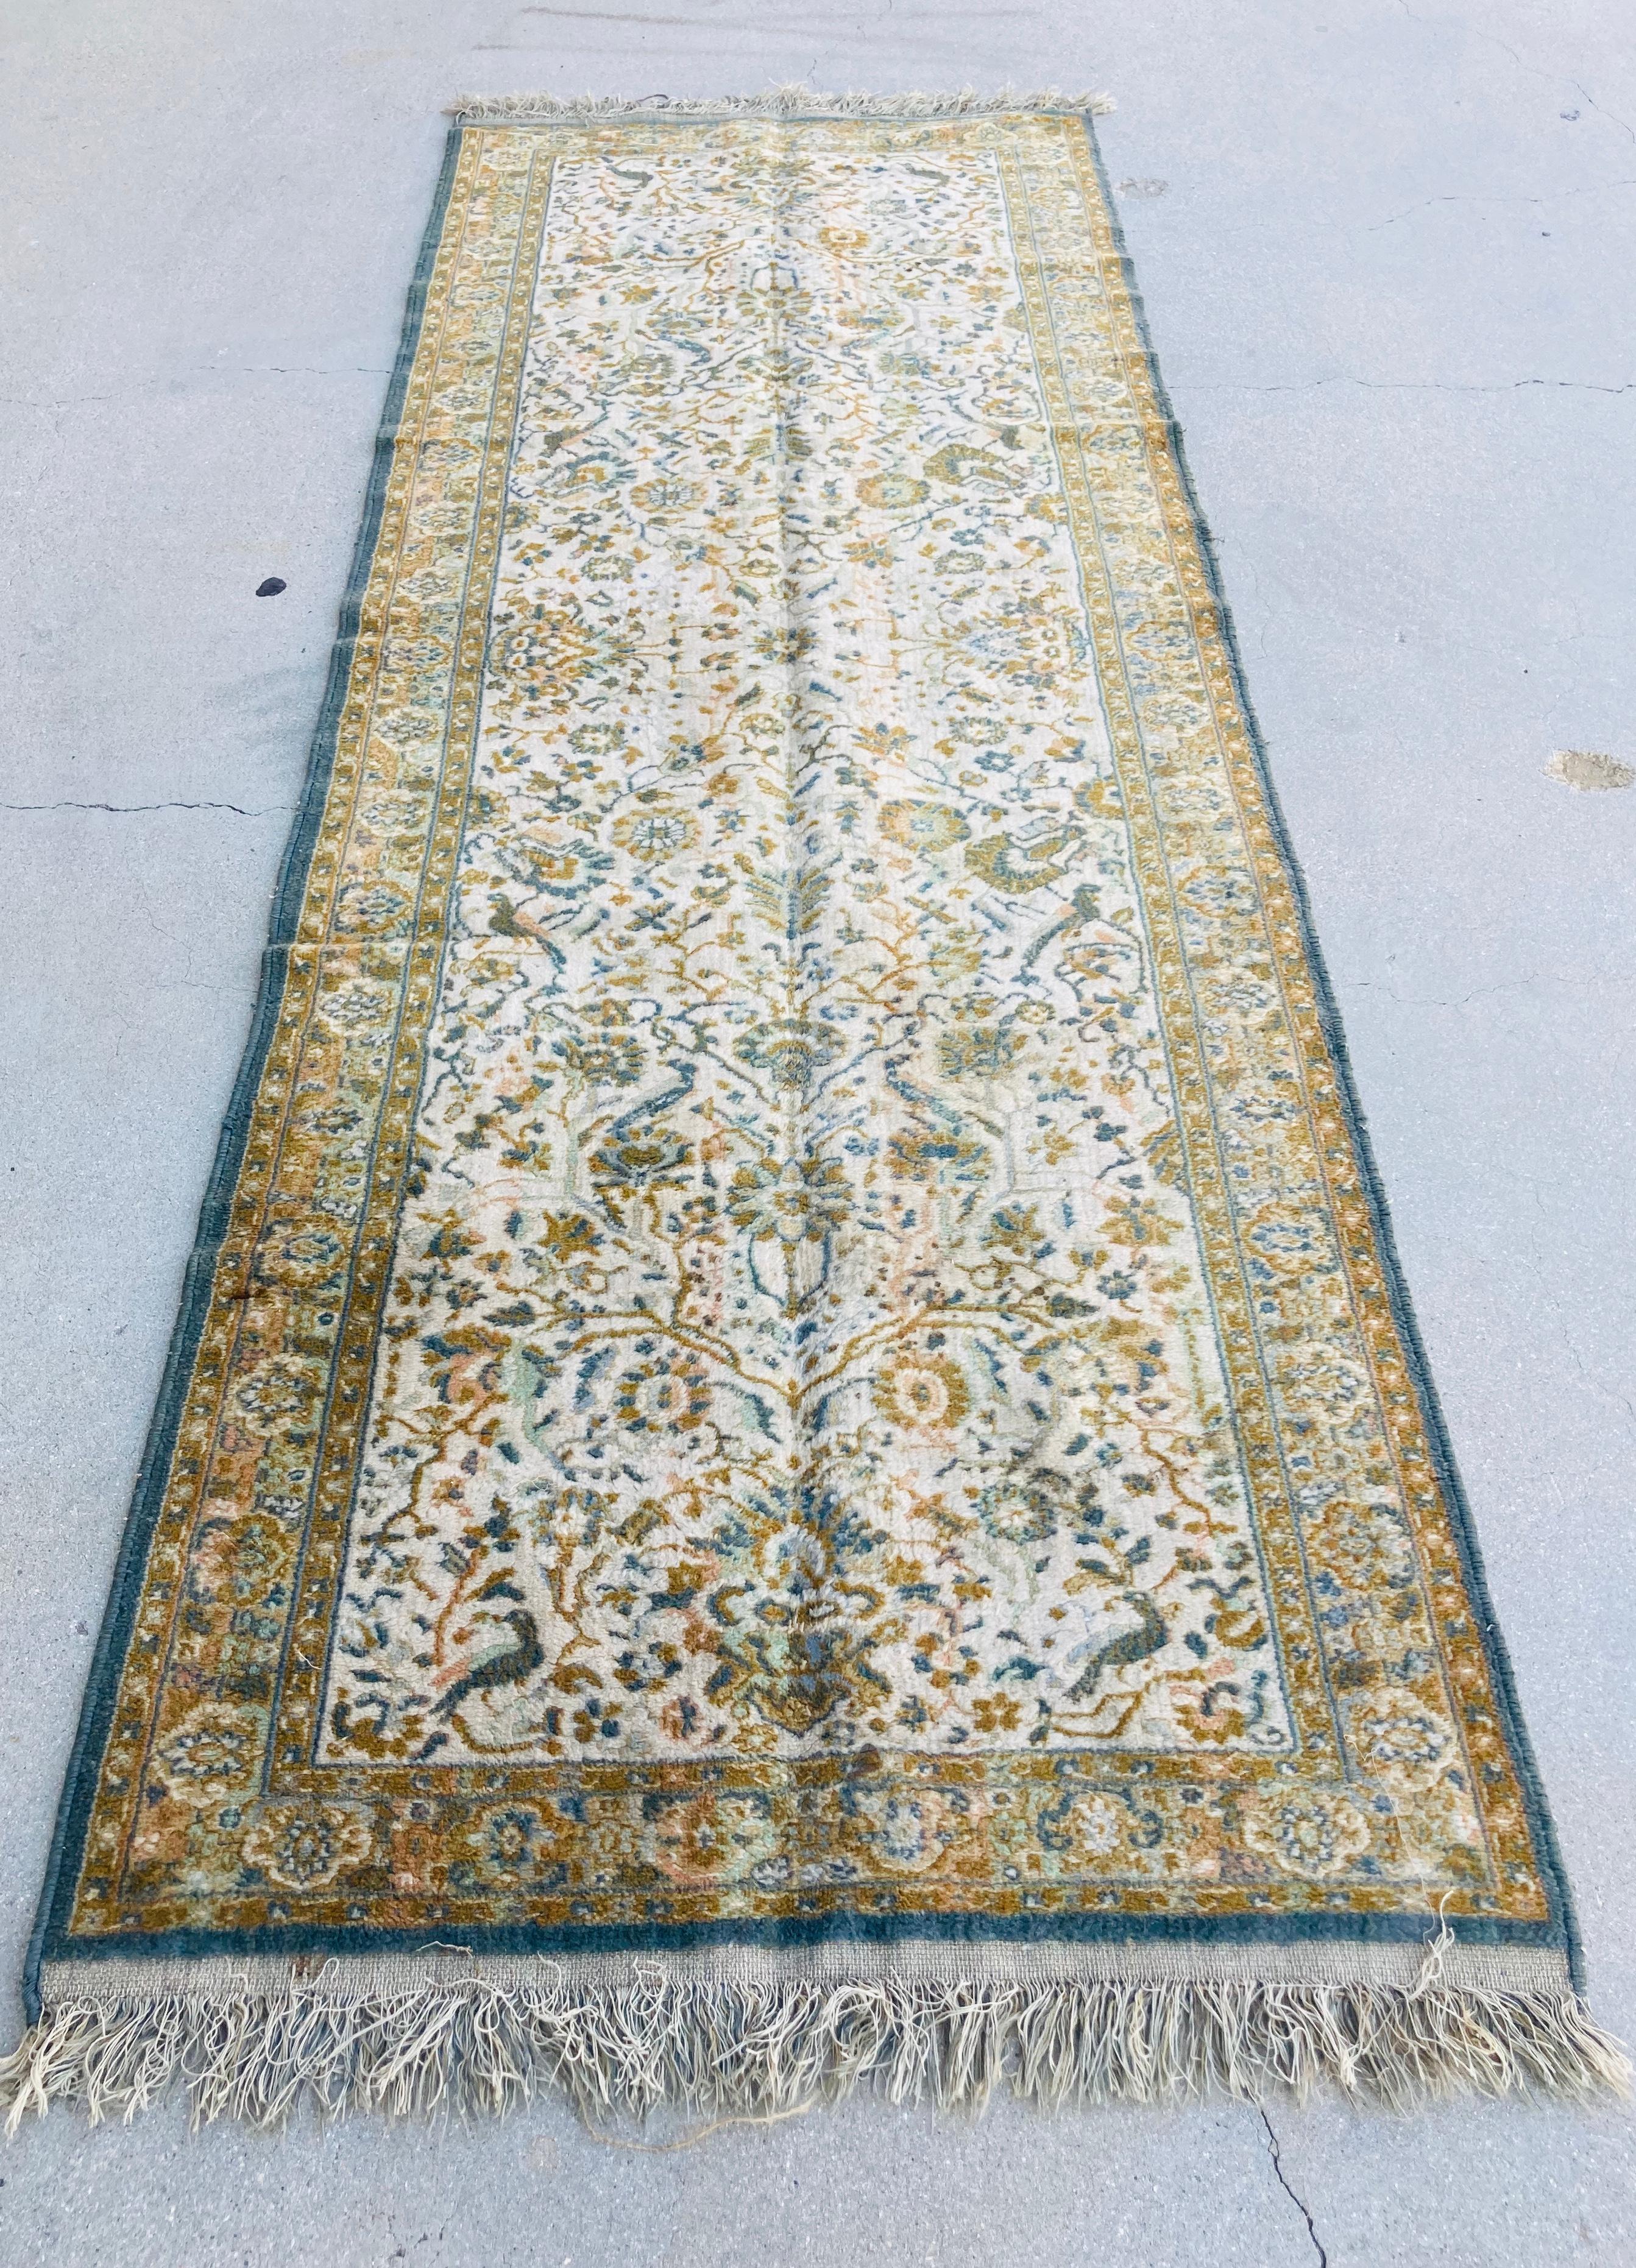 Vintage hand knotted rug runner from Eastern Turkey,
Middle Eastern Asian carpet, circa 1960.
Size: 3ft 9 in x 6ft 5in. 
Traditional Turkish floral and geometric designs and colors in washed out green.